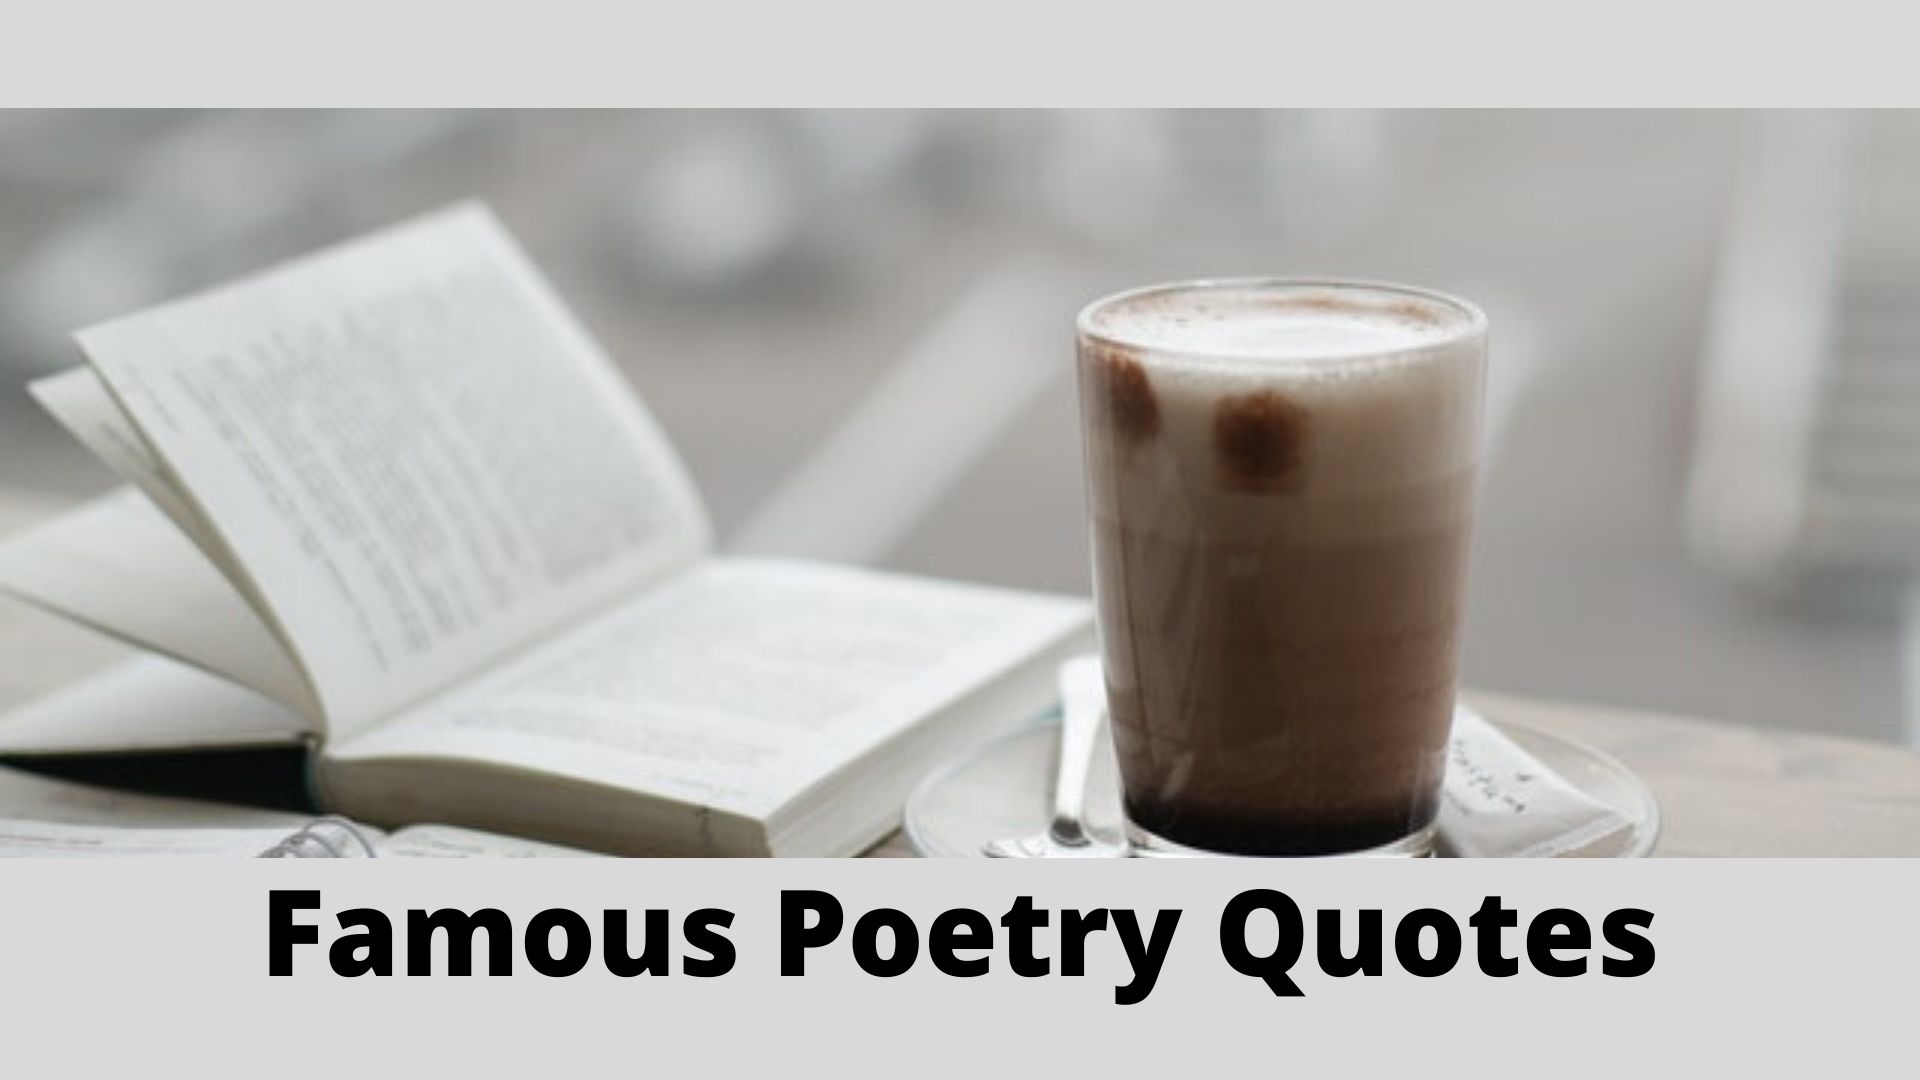 50 of the Most Famous Poetry Quotes [Updated May 2020]